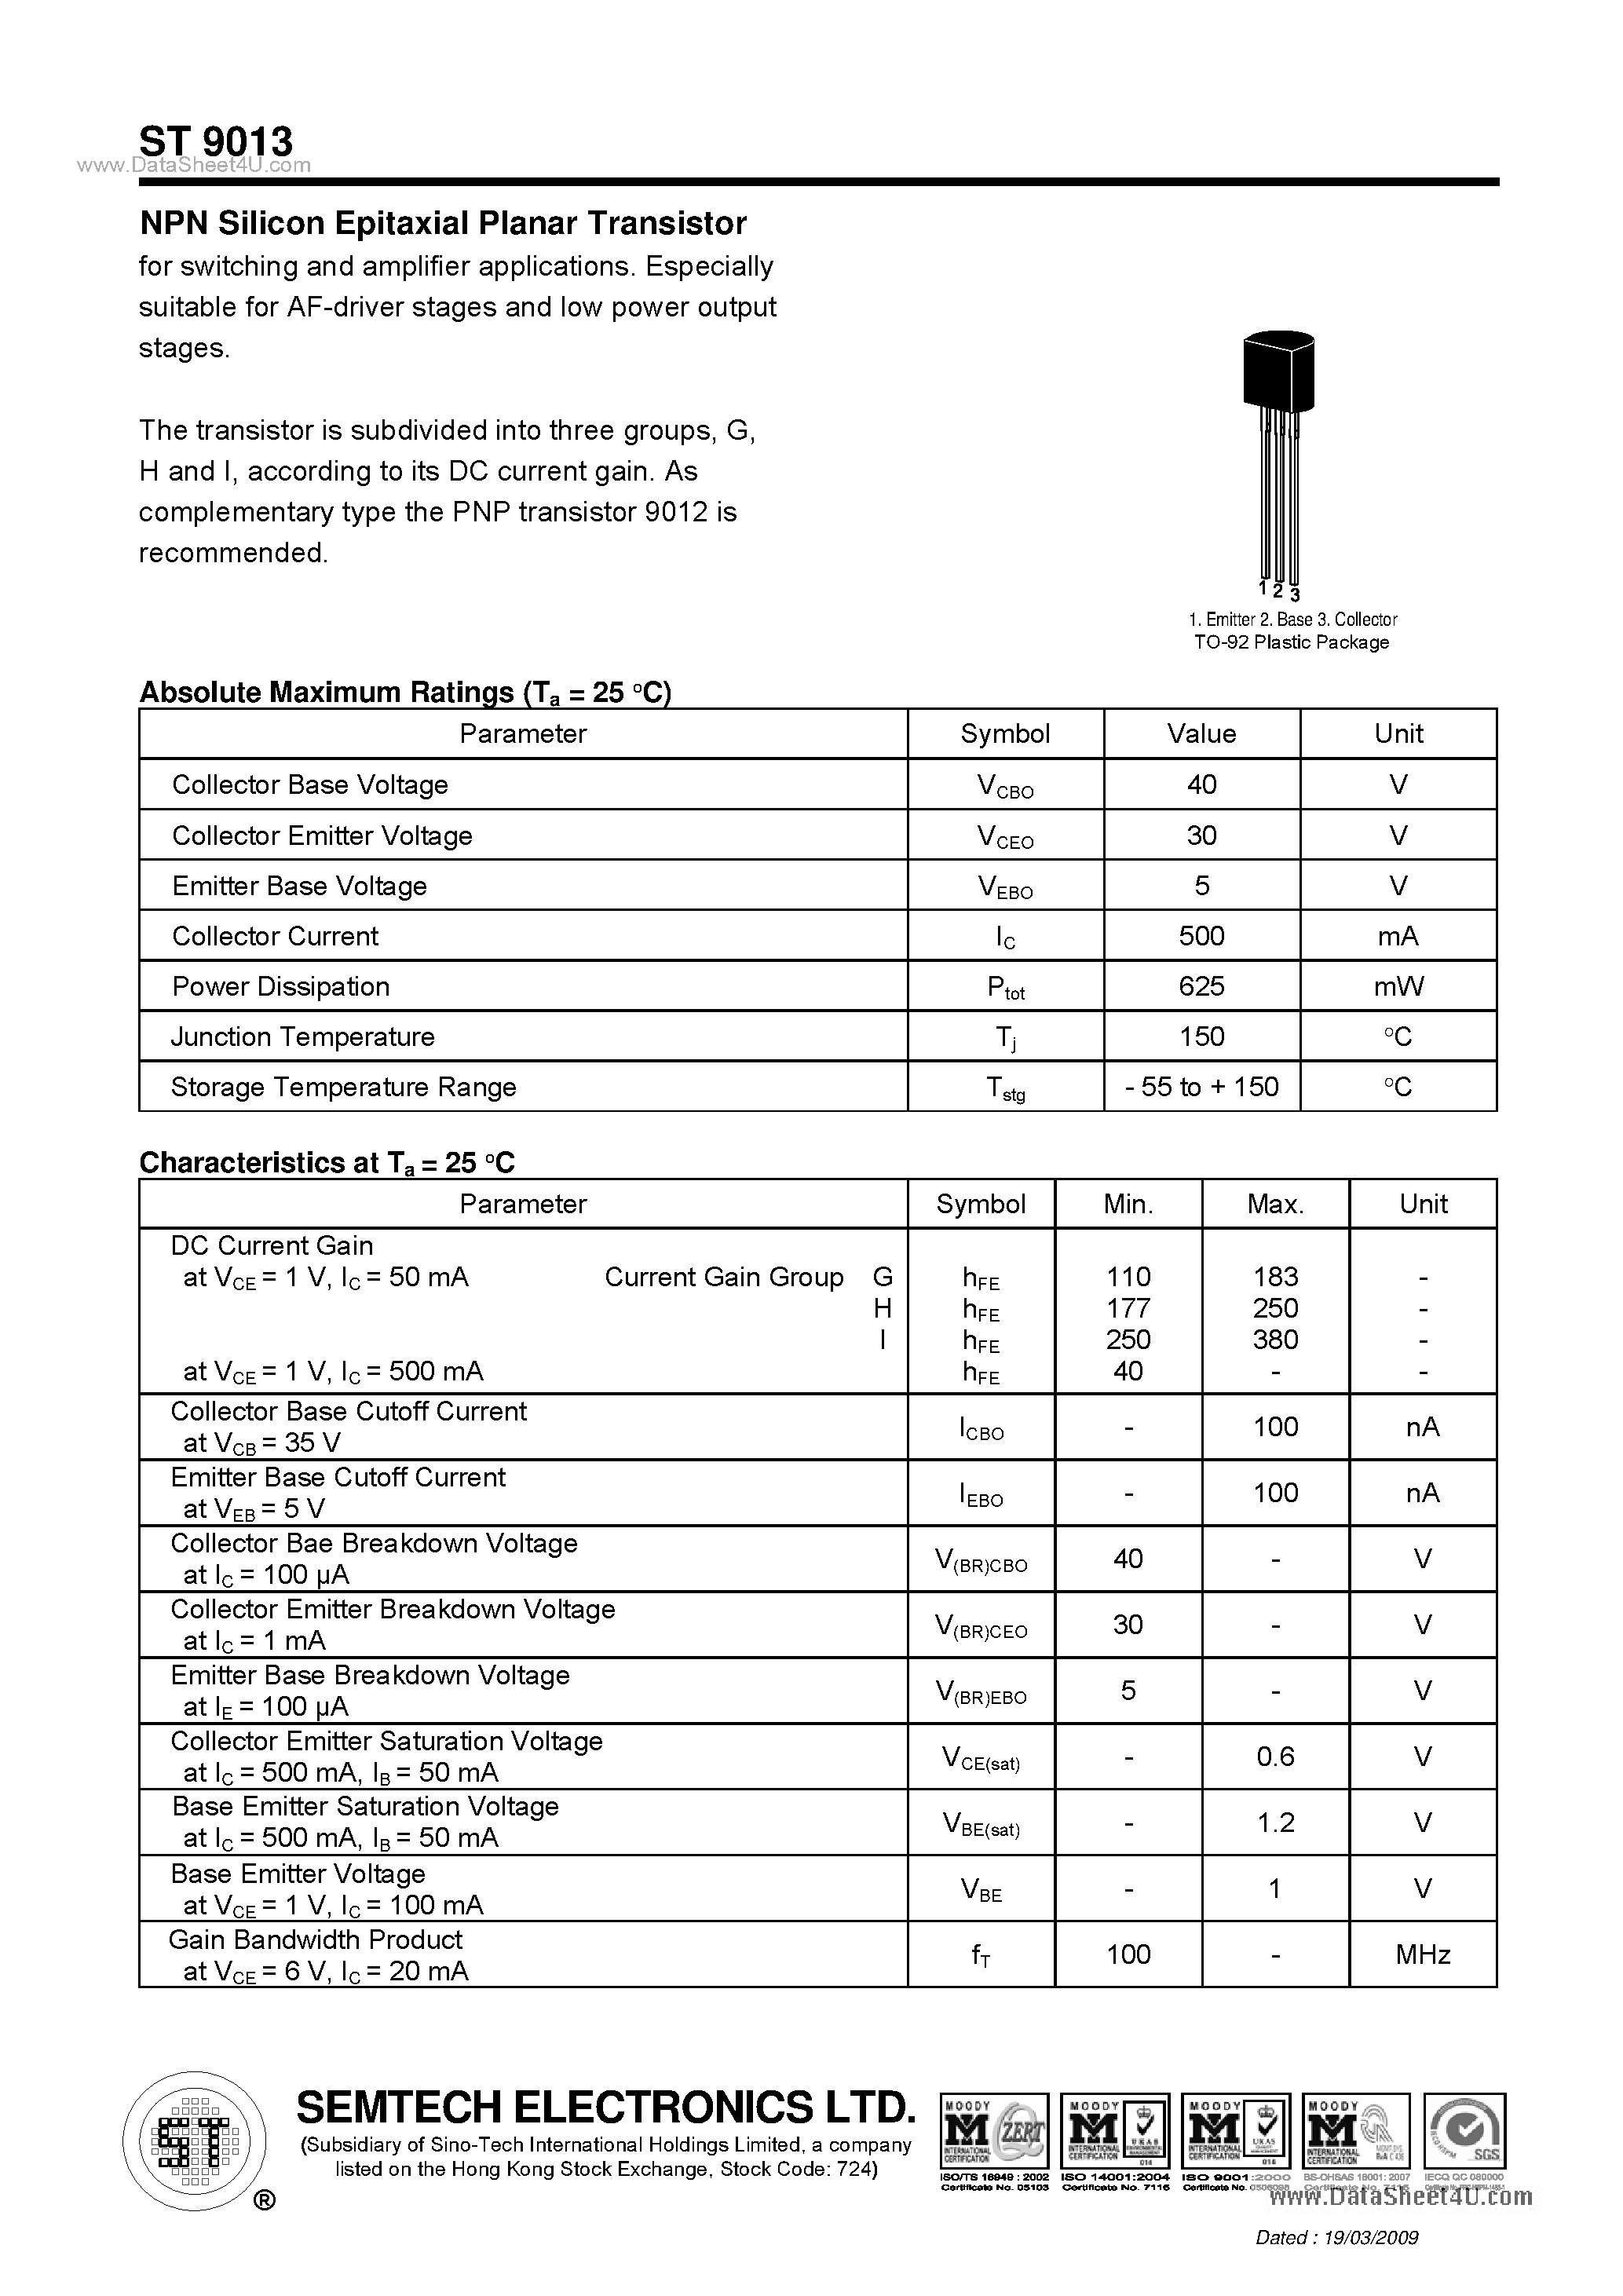 Datasheet ST9013 - NPN Silicon Epitaxial Planar Transistor page 1